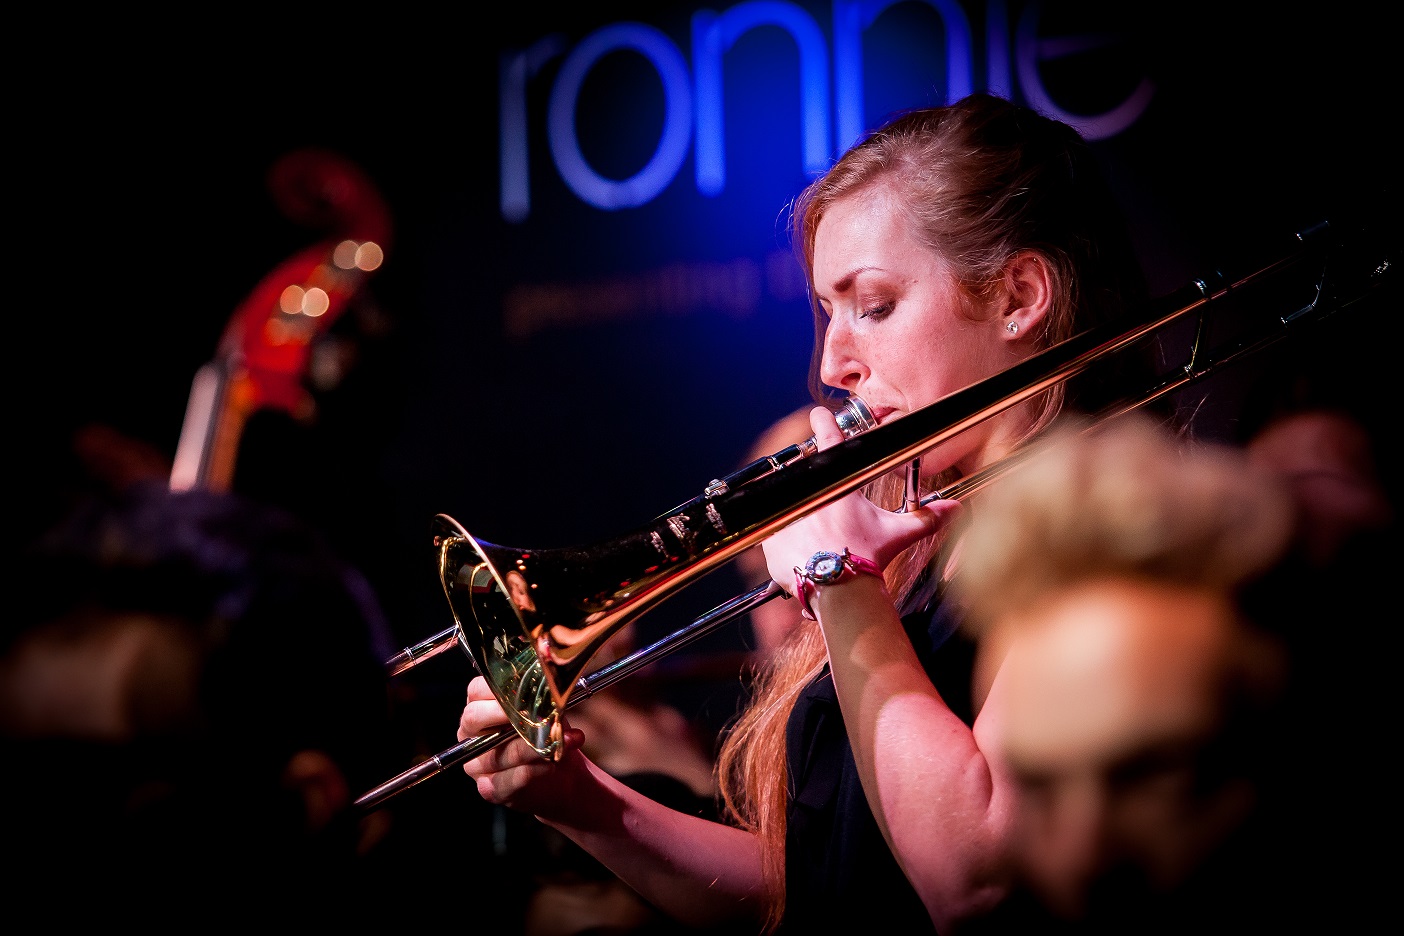 National Youth Jazz Orchestra: The Open Fund for Organisations